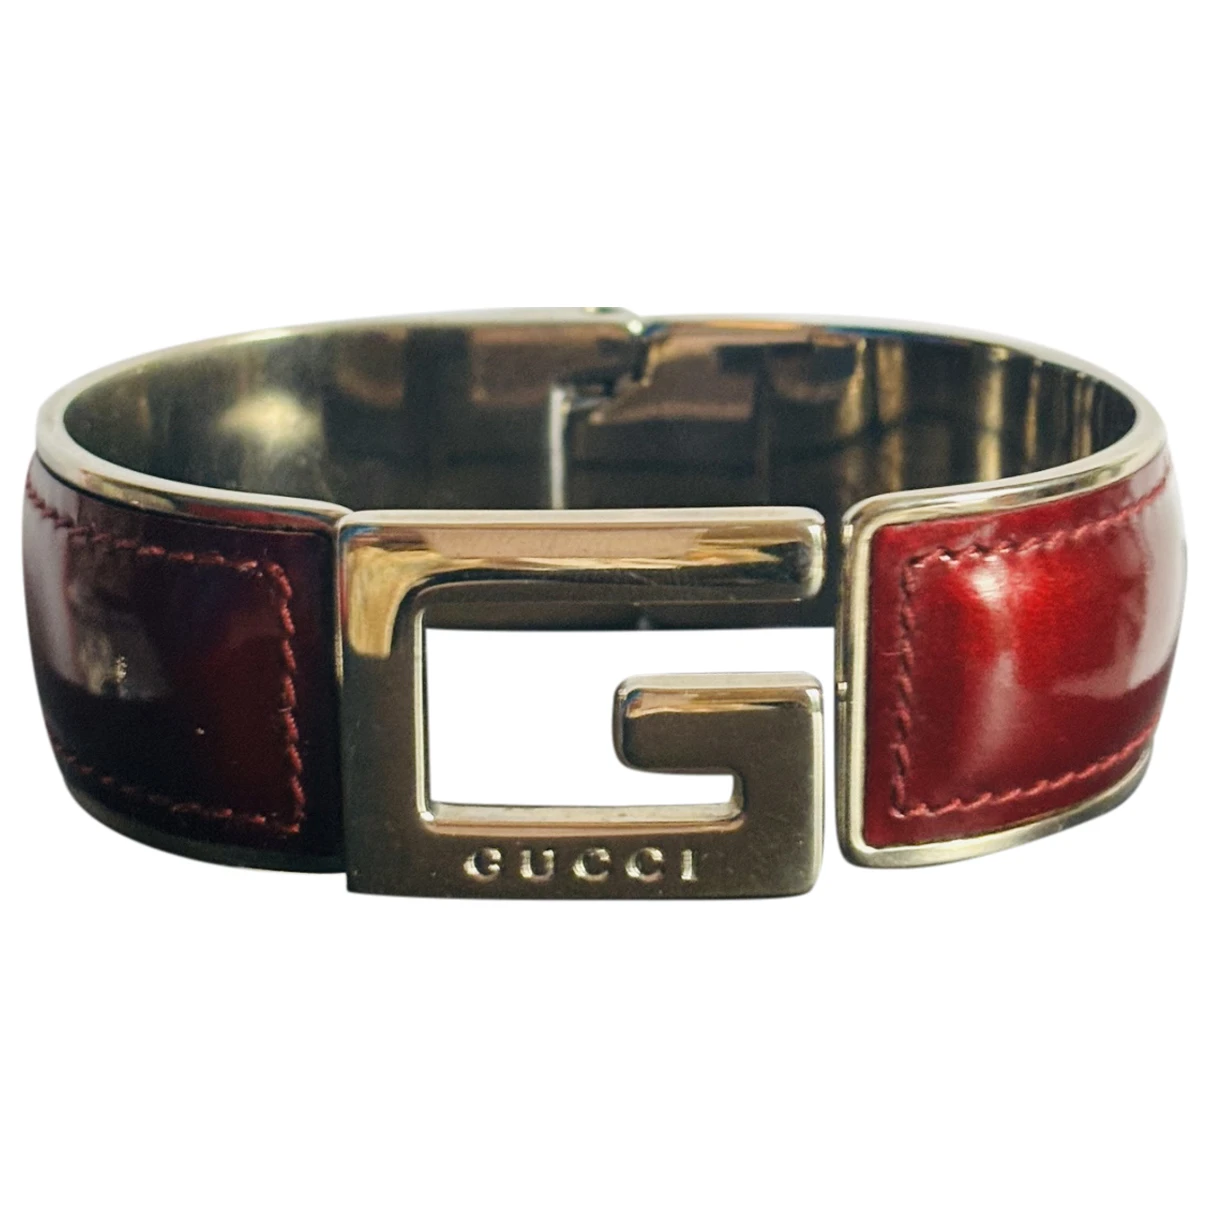 jewellery Gucci bracelets Icon for Female Silver. Used condition